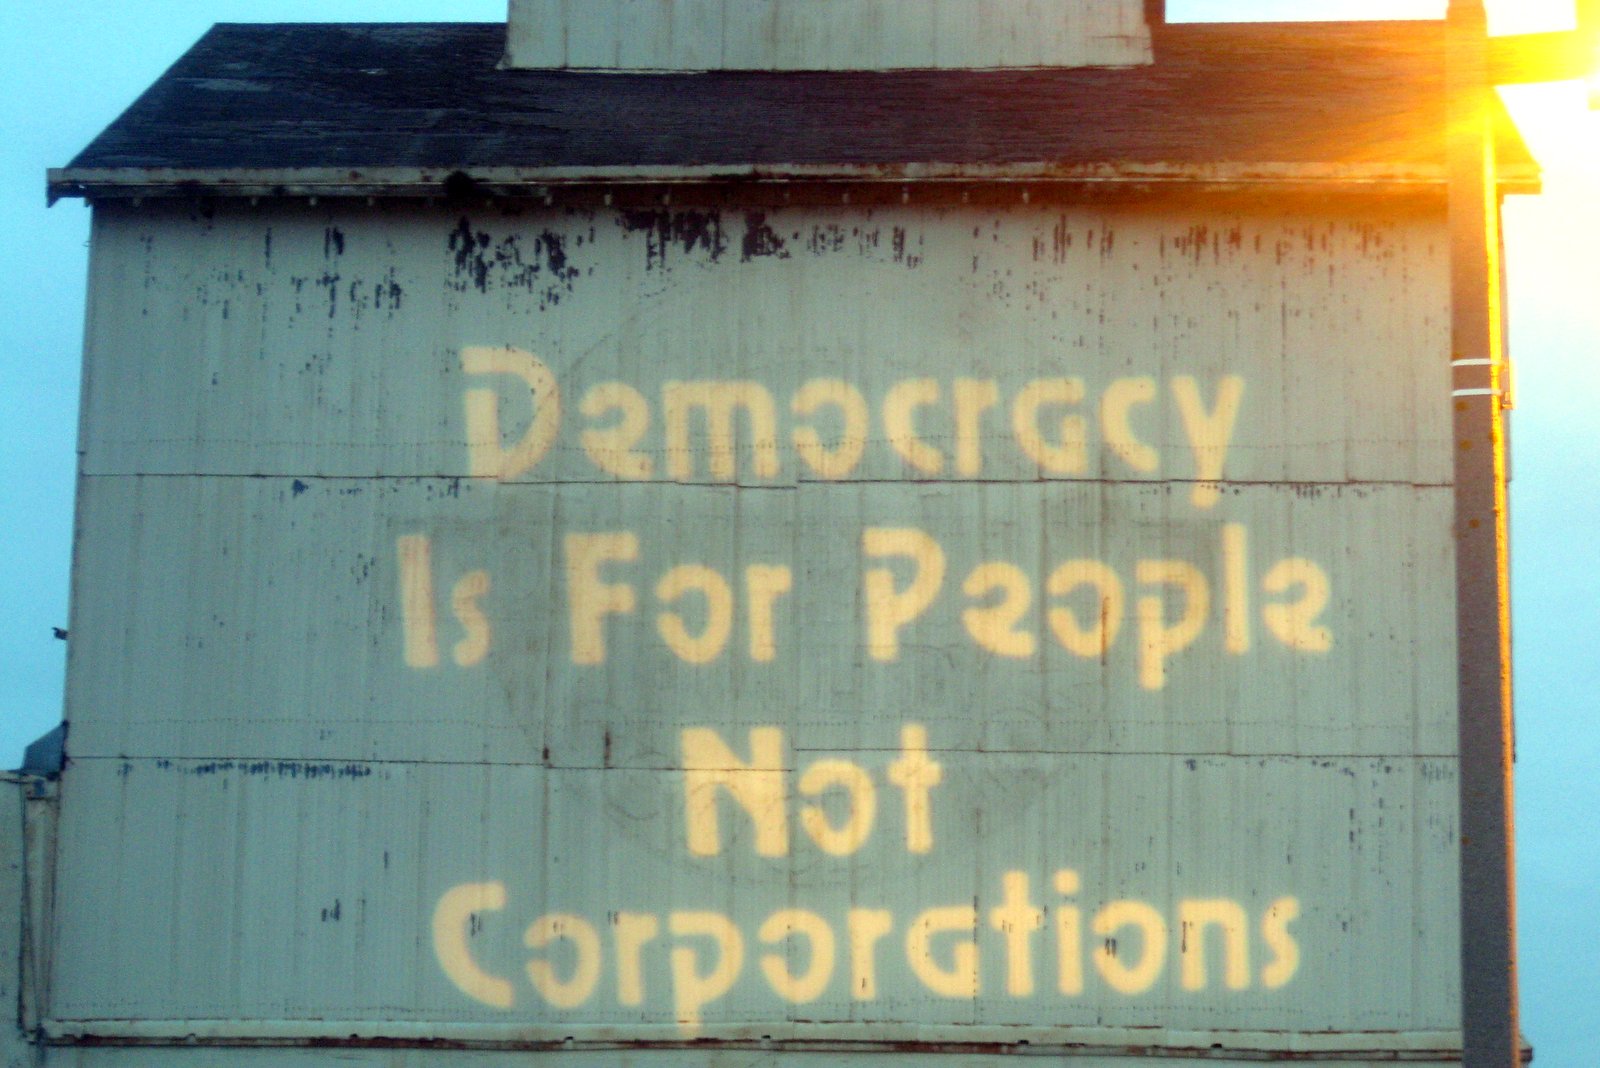 An old building with the words "Democracy Is For People, Not Corporations" painted on it